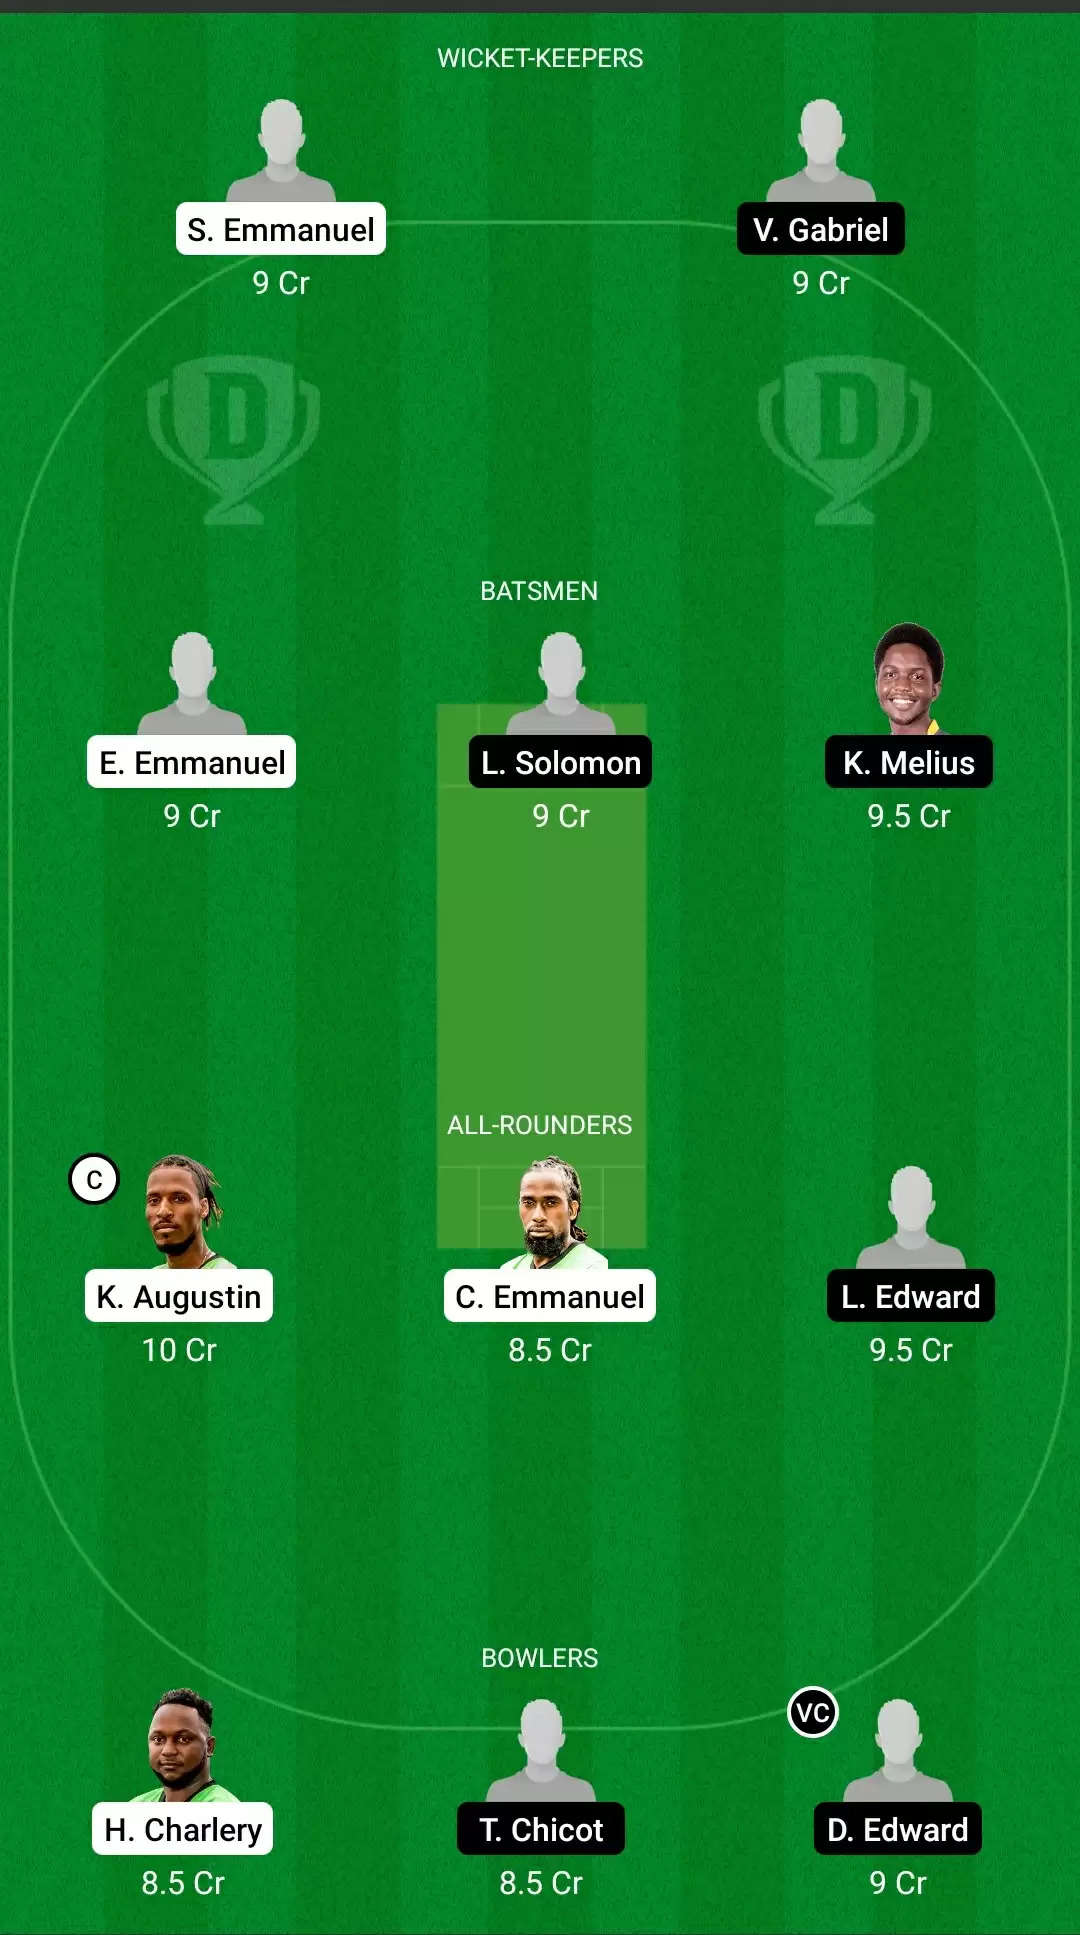 St. Lucia T10 Blast 2021, Match 12: MRS vs GICB Dream11 Prediction, Fantasy Cricket Tips, Team, Playing 11, Pitch Report, Weather Conditions and Injury Update